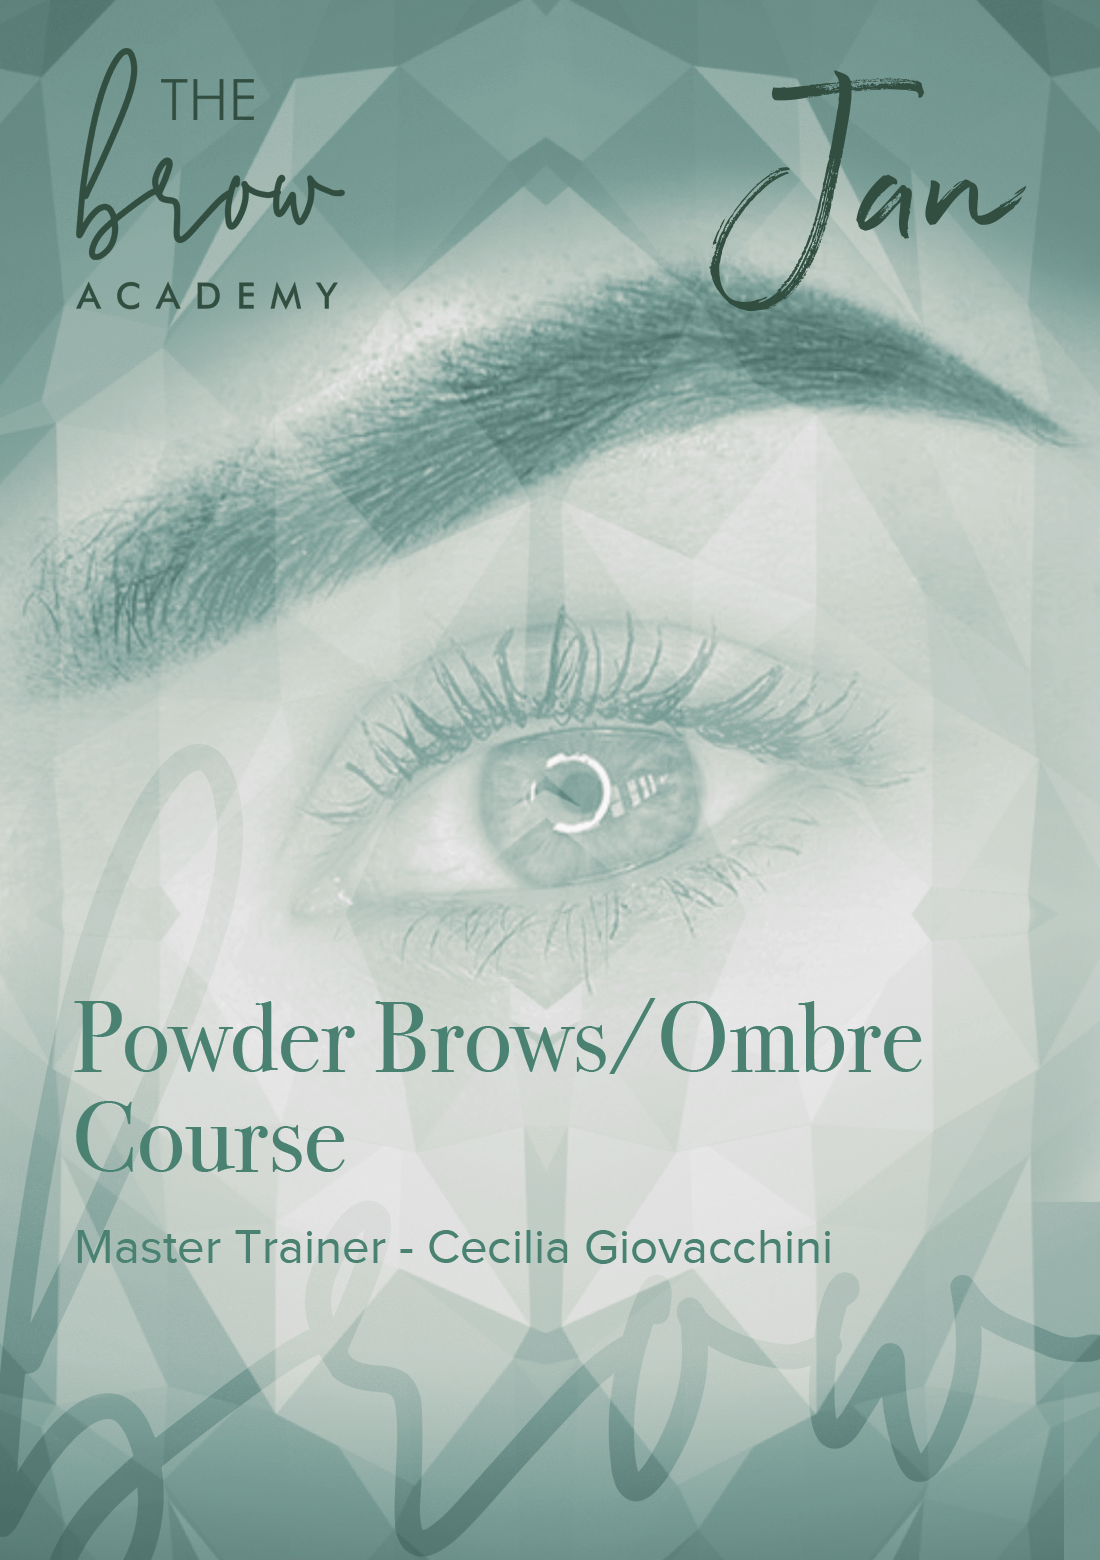 East Bay Powder Brows Ombre Courses - January